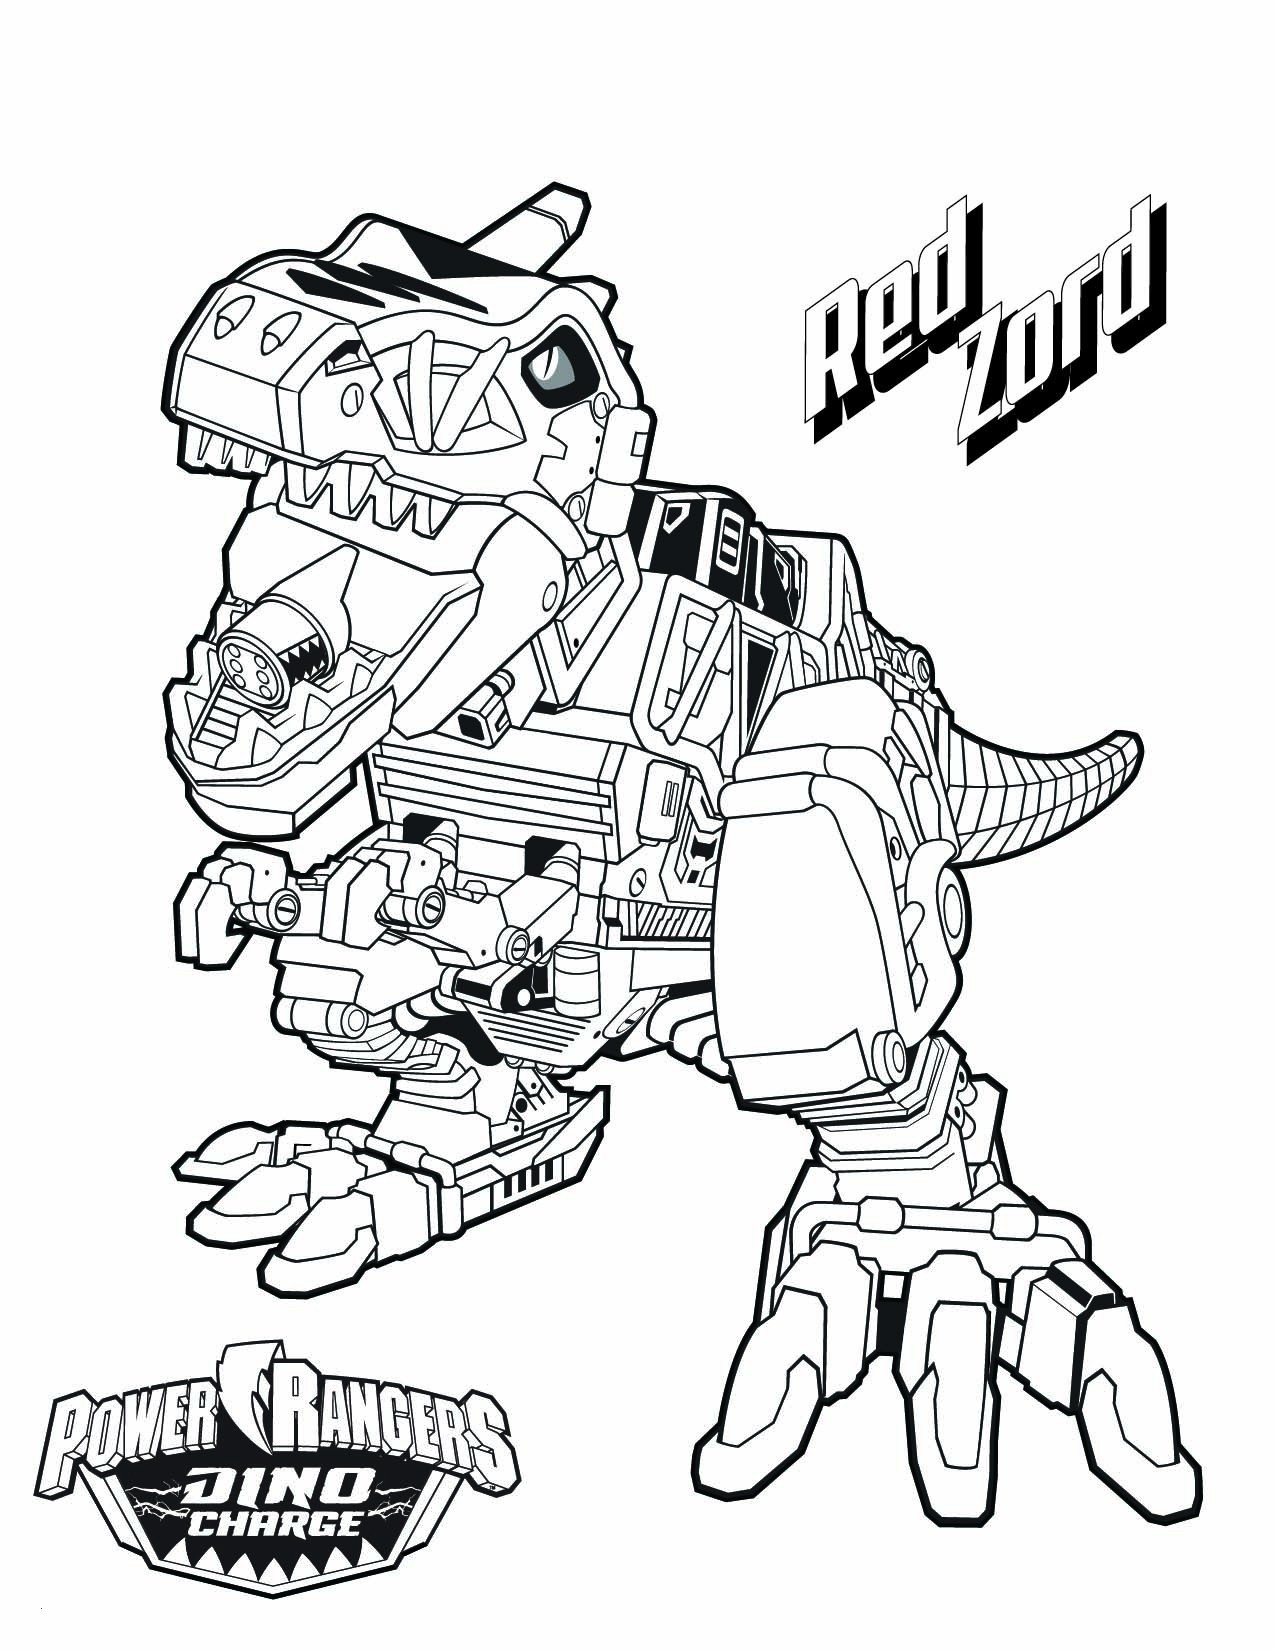 Power Ranger Coloring Pages Wonderful Picasso Coloring Pages Fresh New Power Rangers Coloring Pages